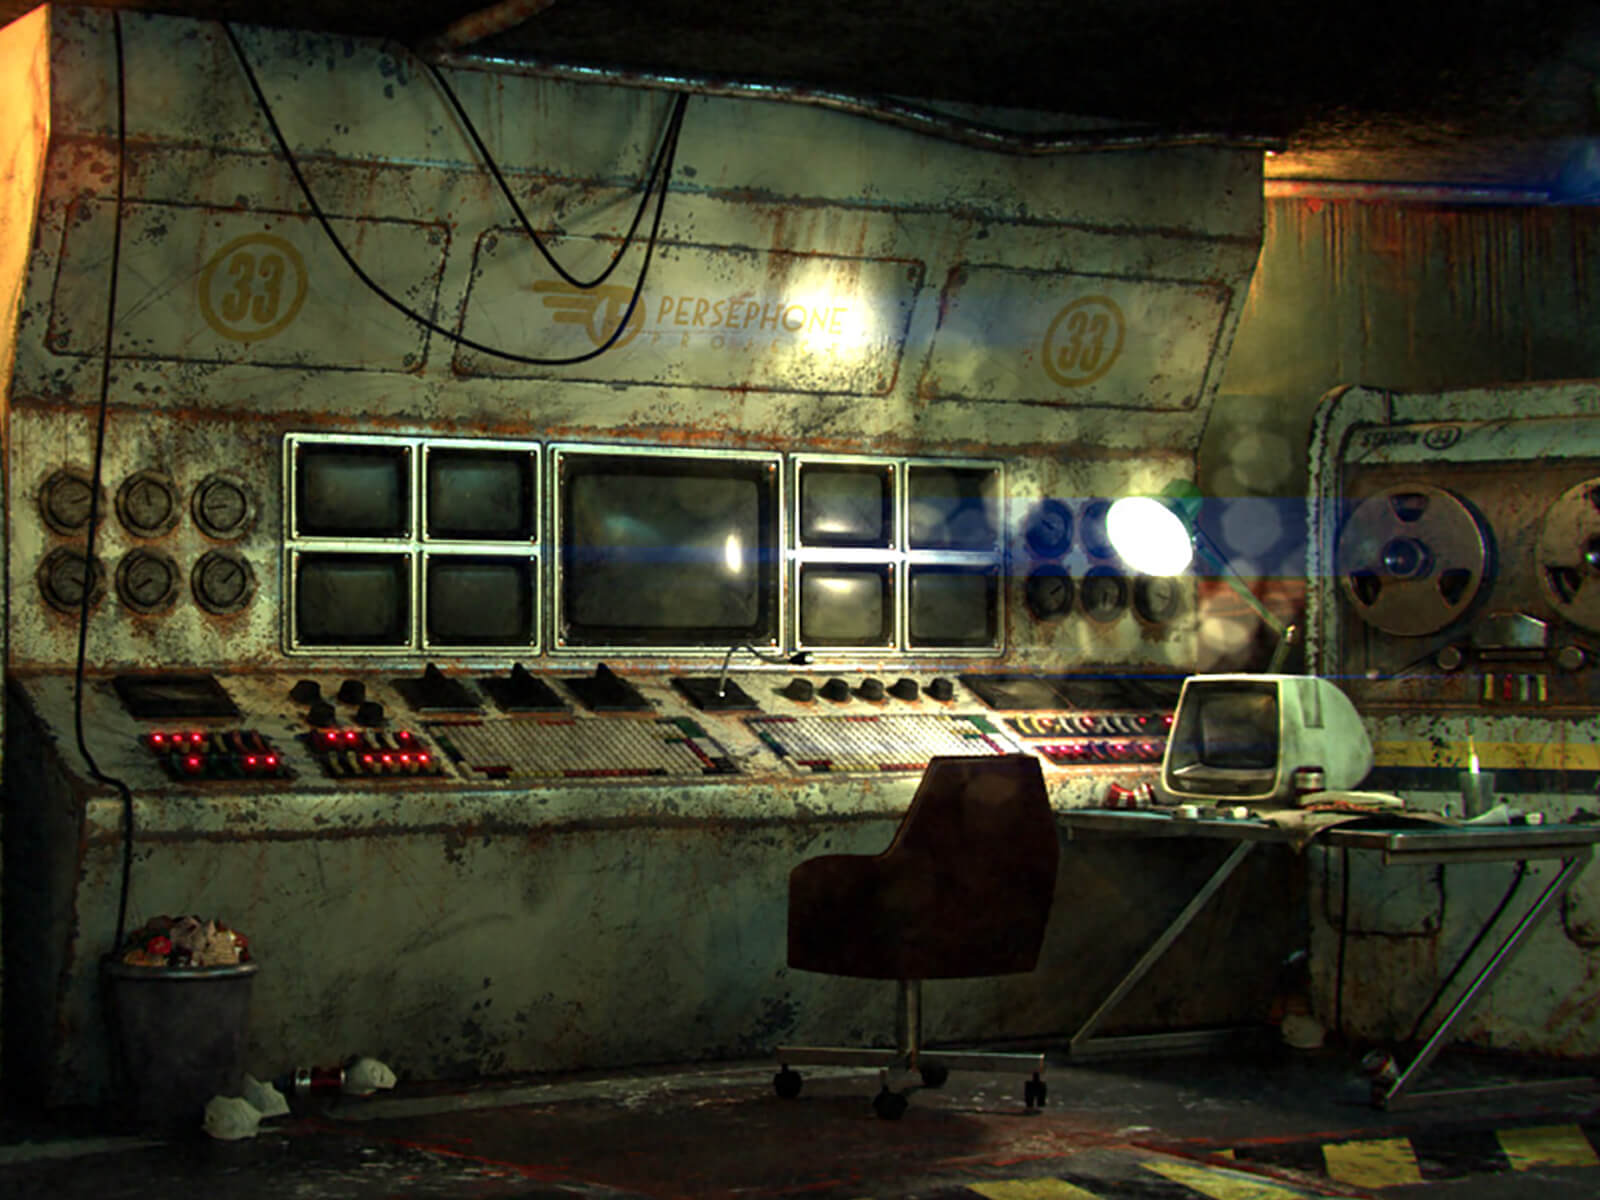 In an underground bunker, a dilapidated control console of obsolete electronics, monitors, and magnetic tape computers.